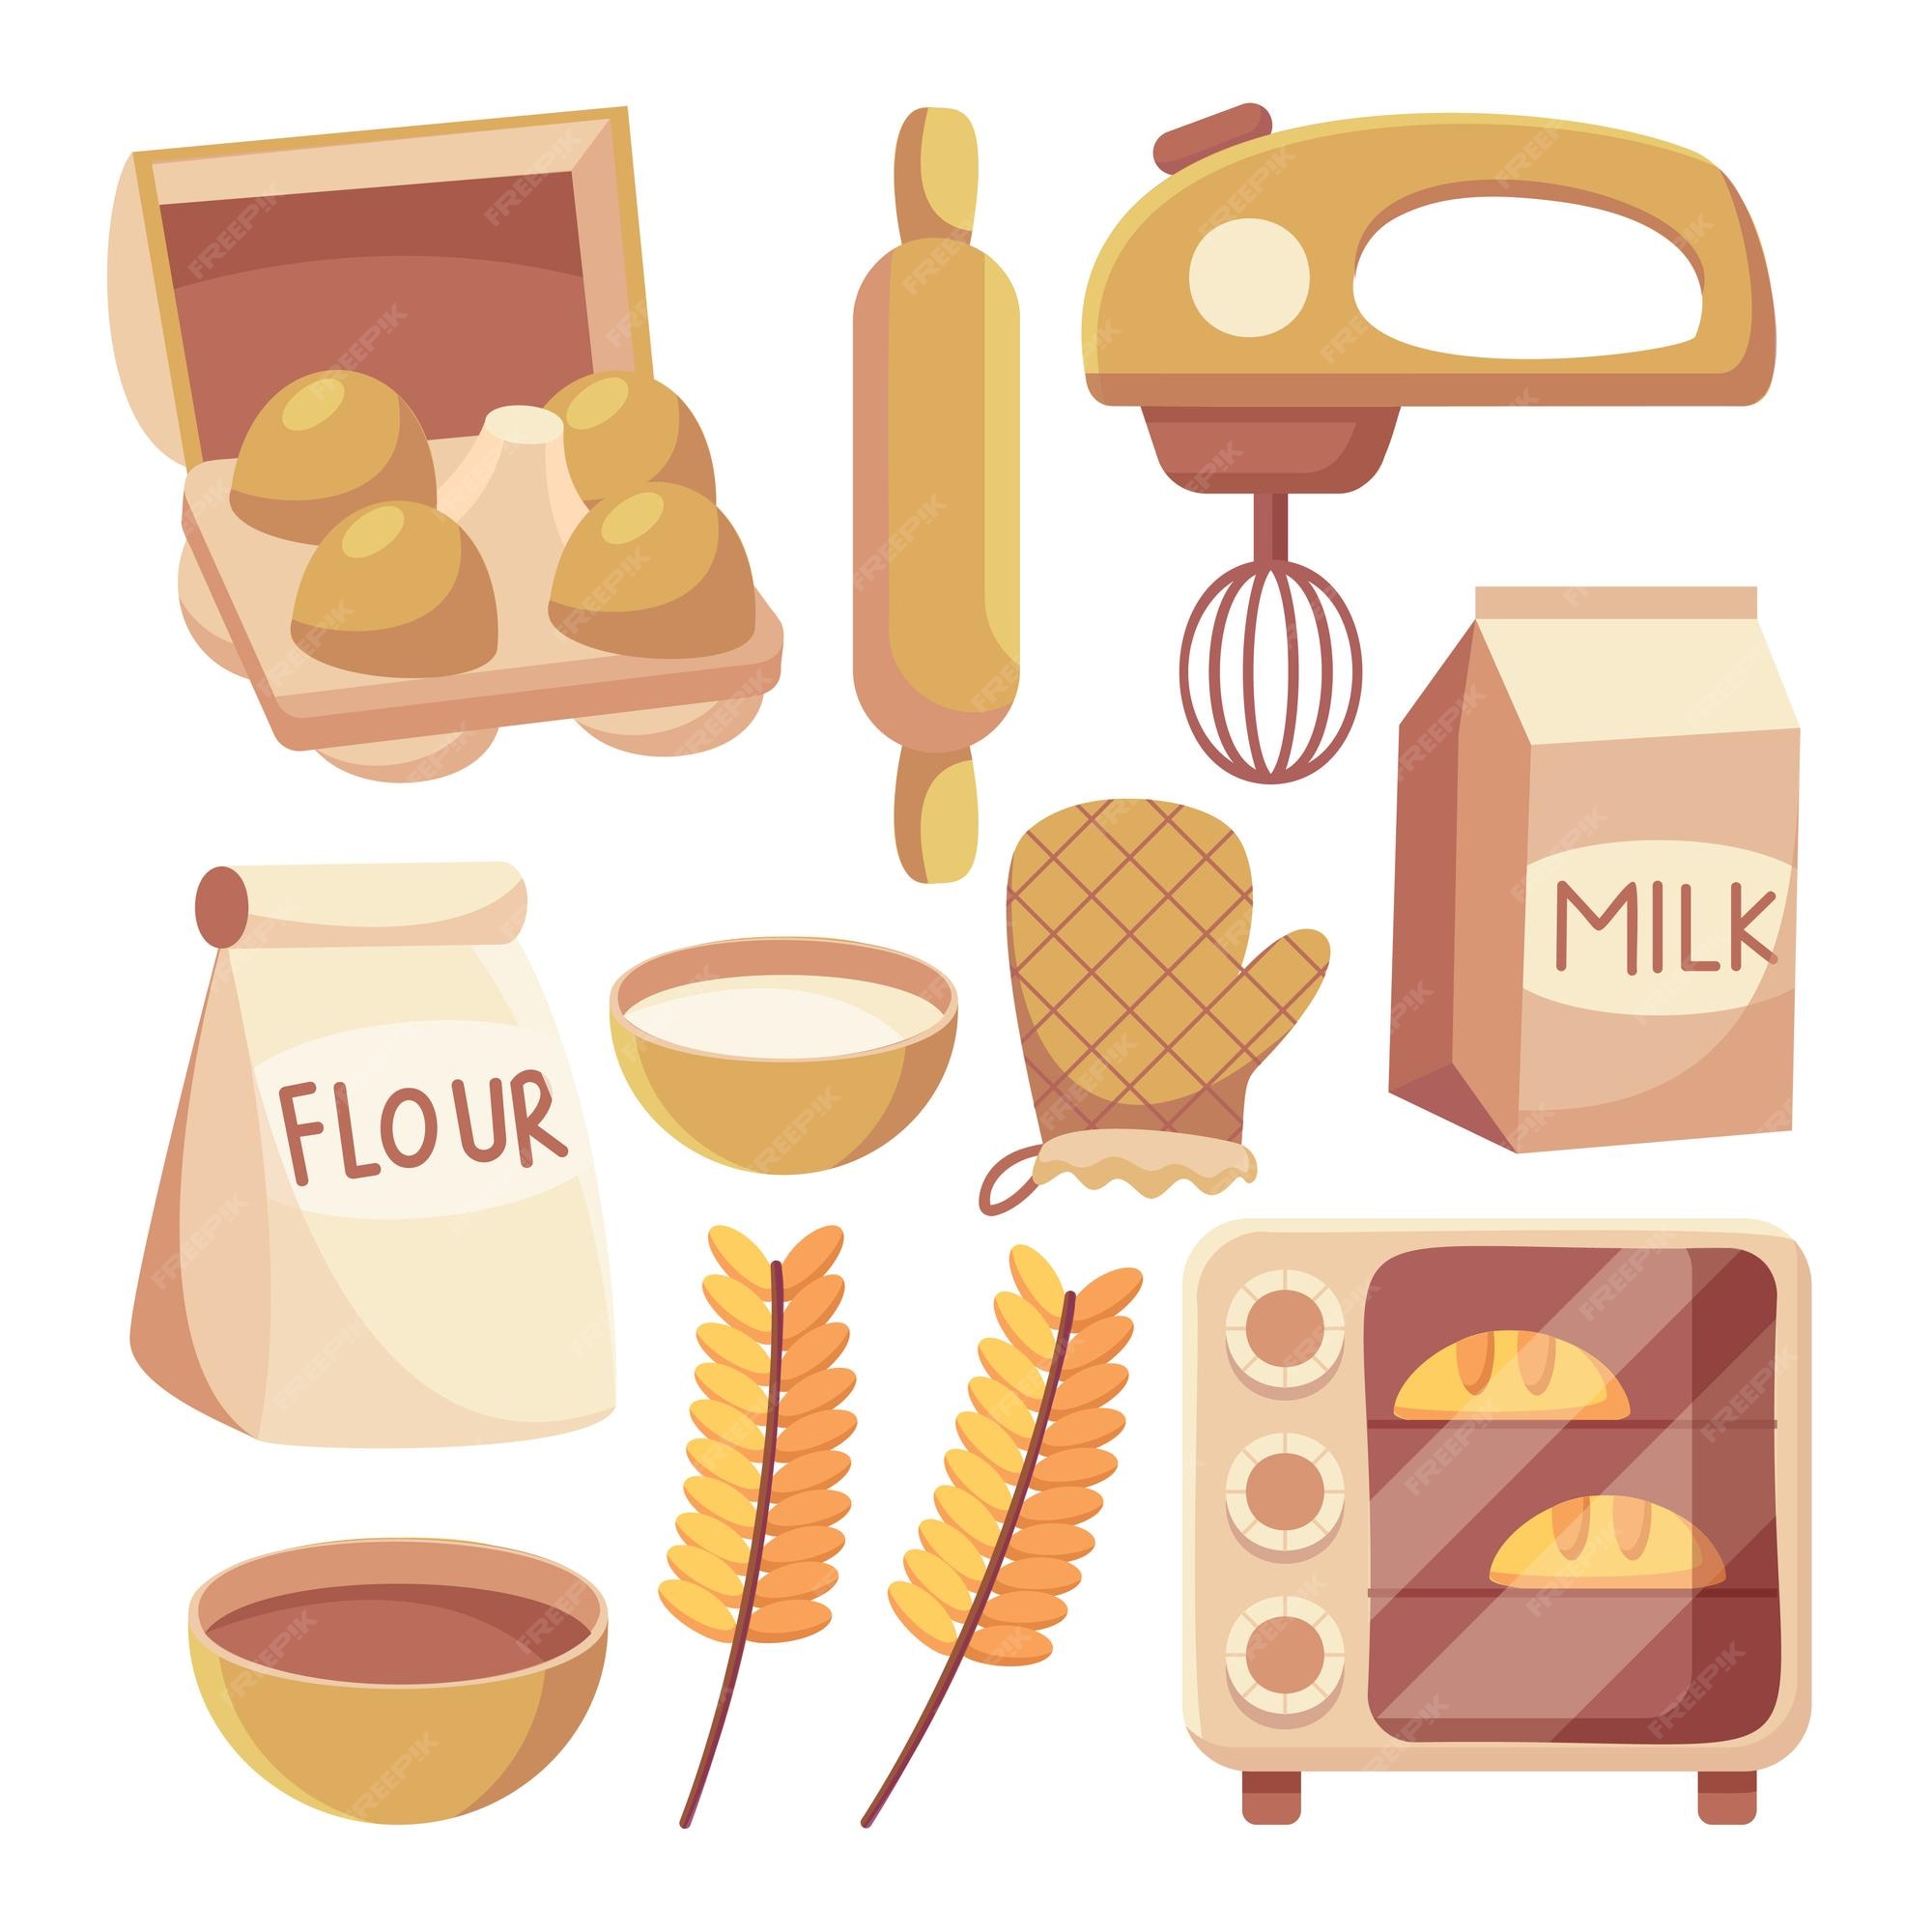 https://img.freepik.com/free-vector/set-bakery-equipment-baking-tools-breads-pastries-such-as-scale-mixer-machine-kettles-other-drawing-style-white-background-vector-illustration_1150-65668.jpg?w=2000